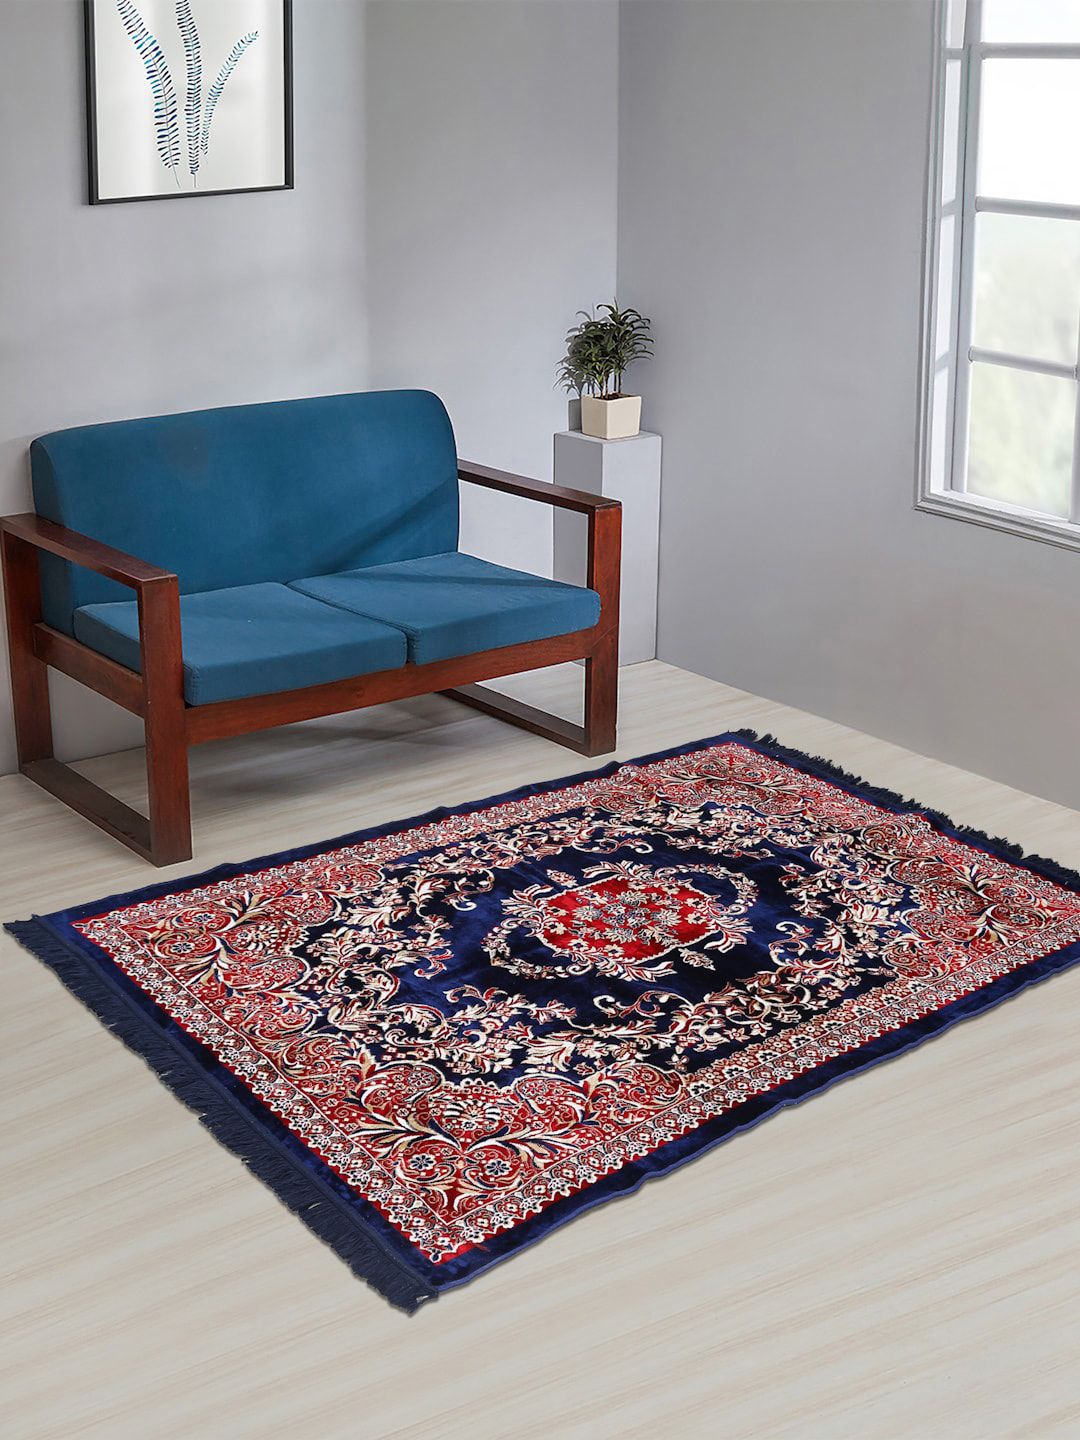 KLOTTHE Blue & Maroon Floral Printed Handmade Cotton Traditional Carpet Price in India